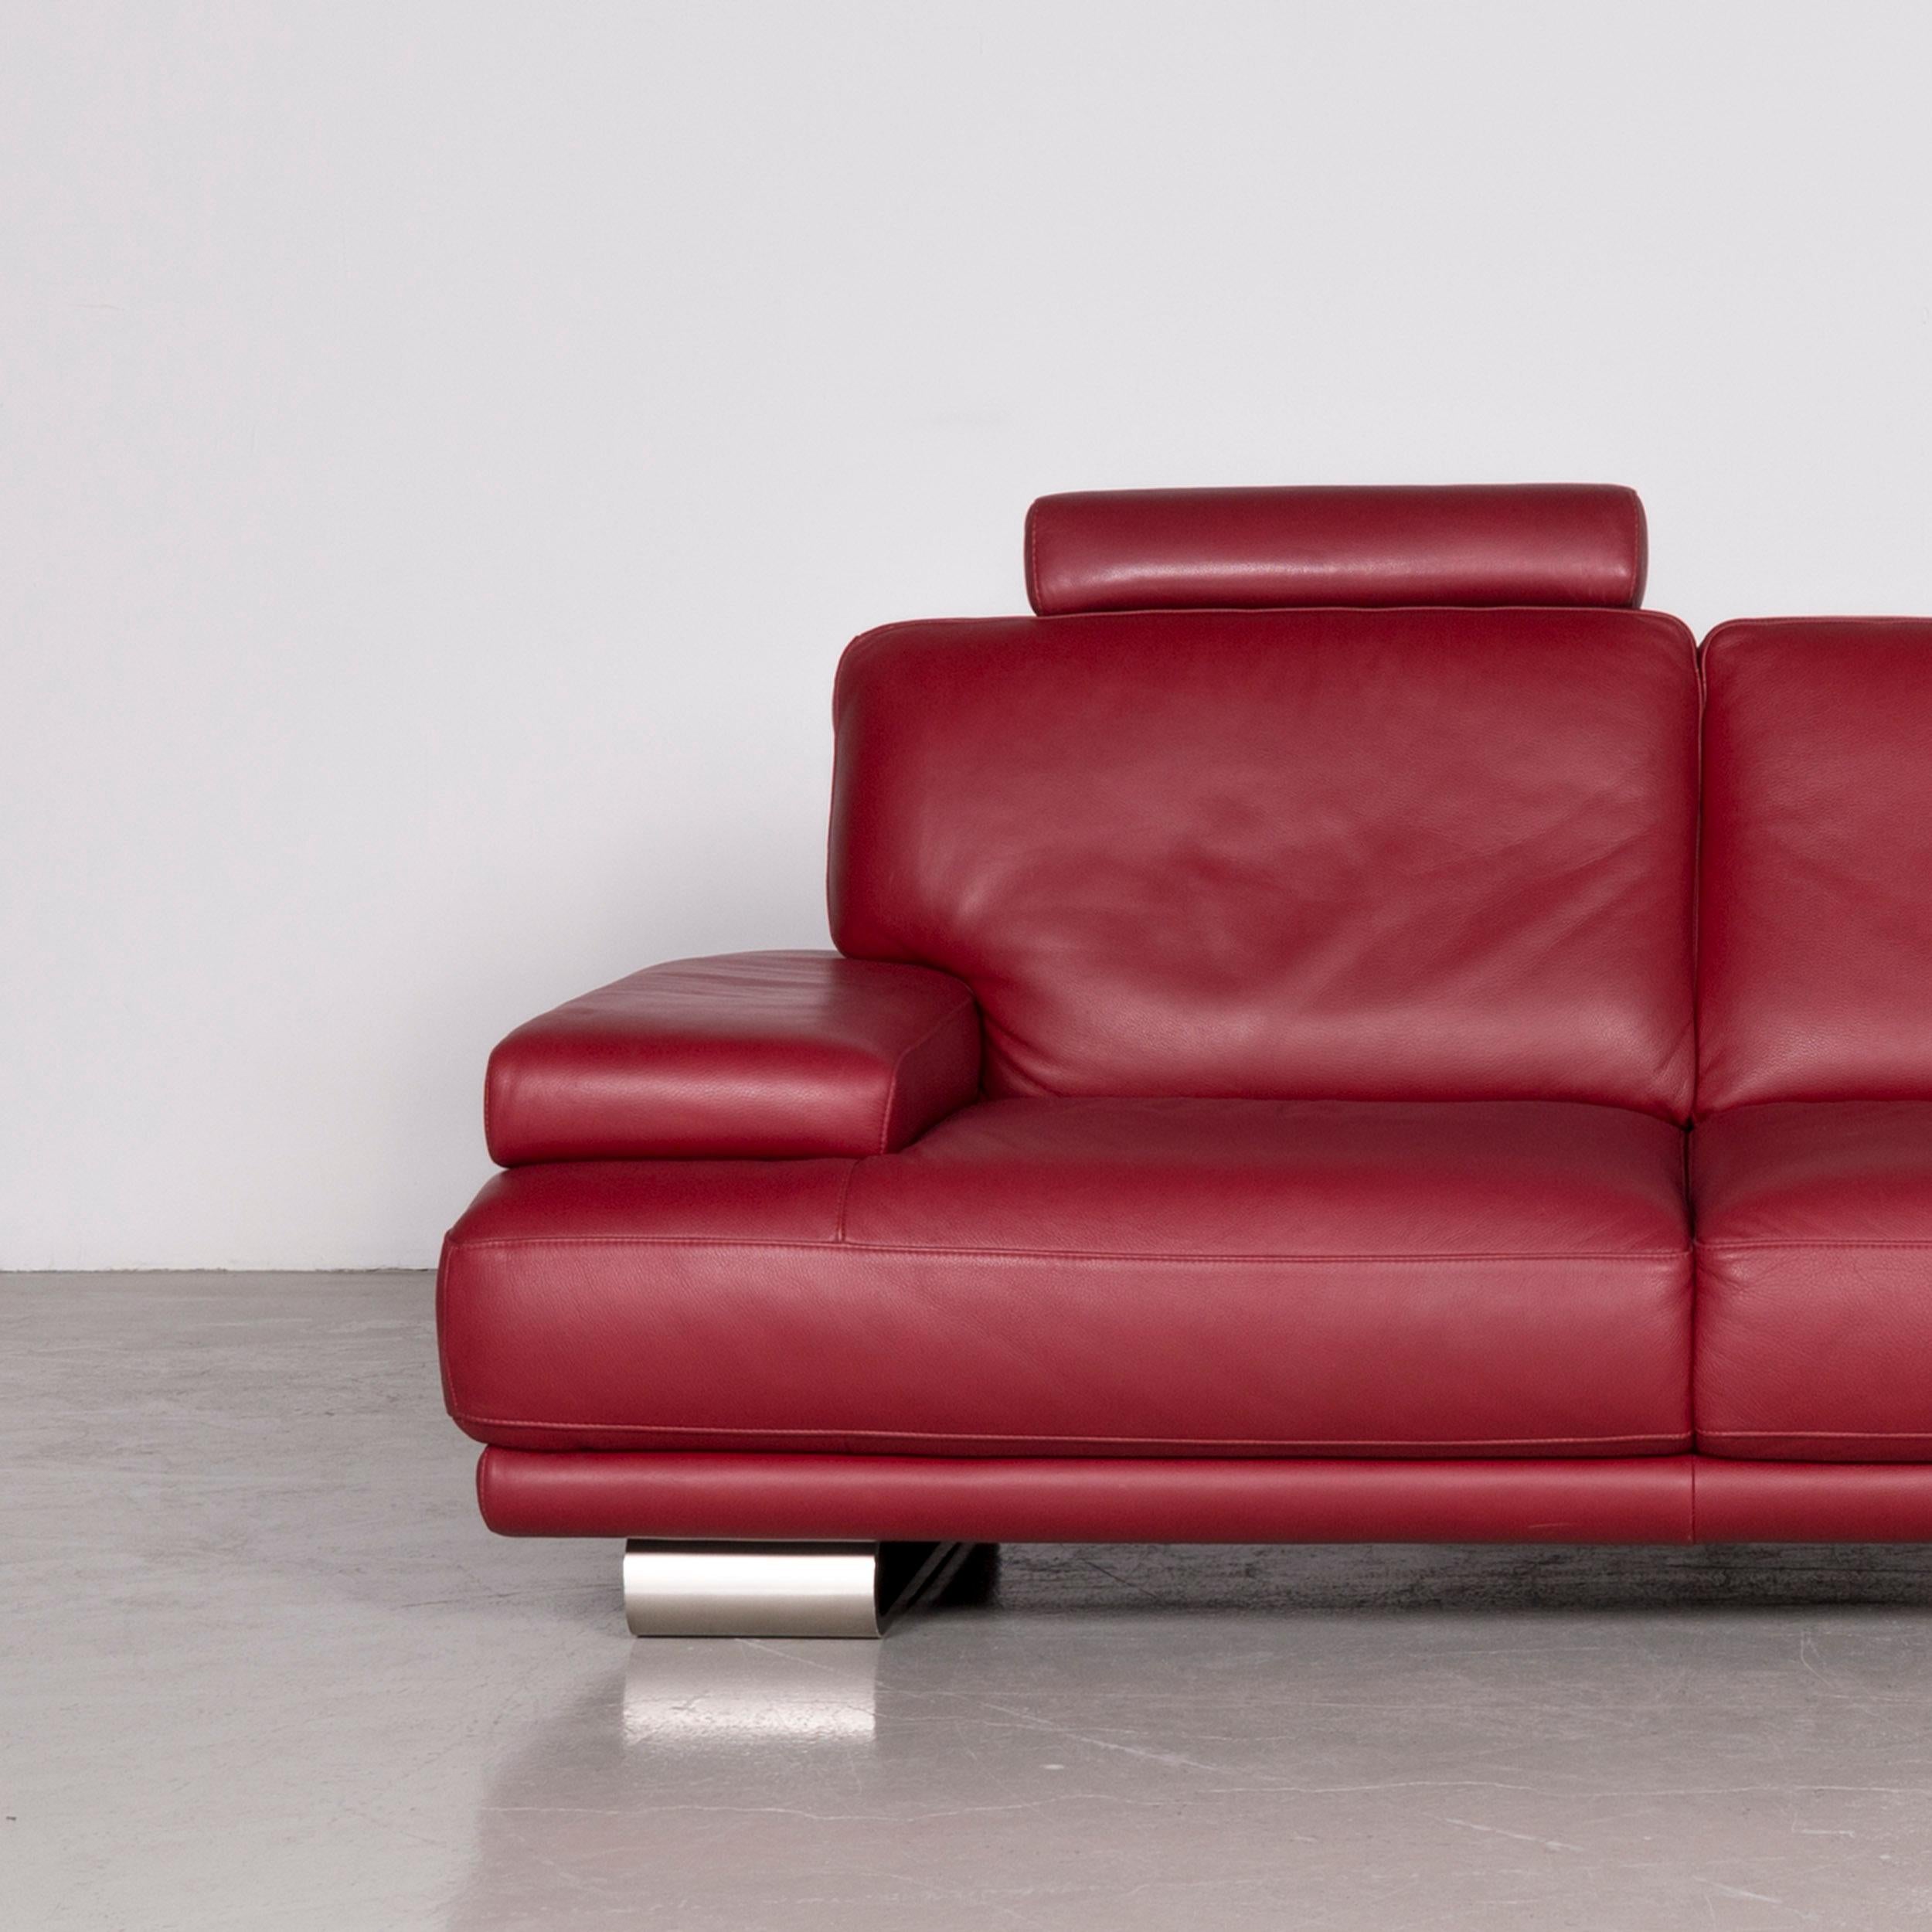 natuzzi red leather couch